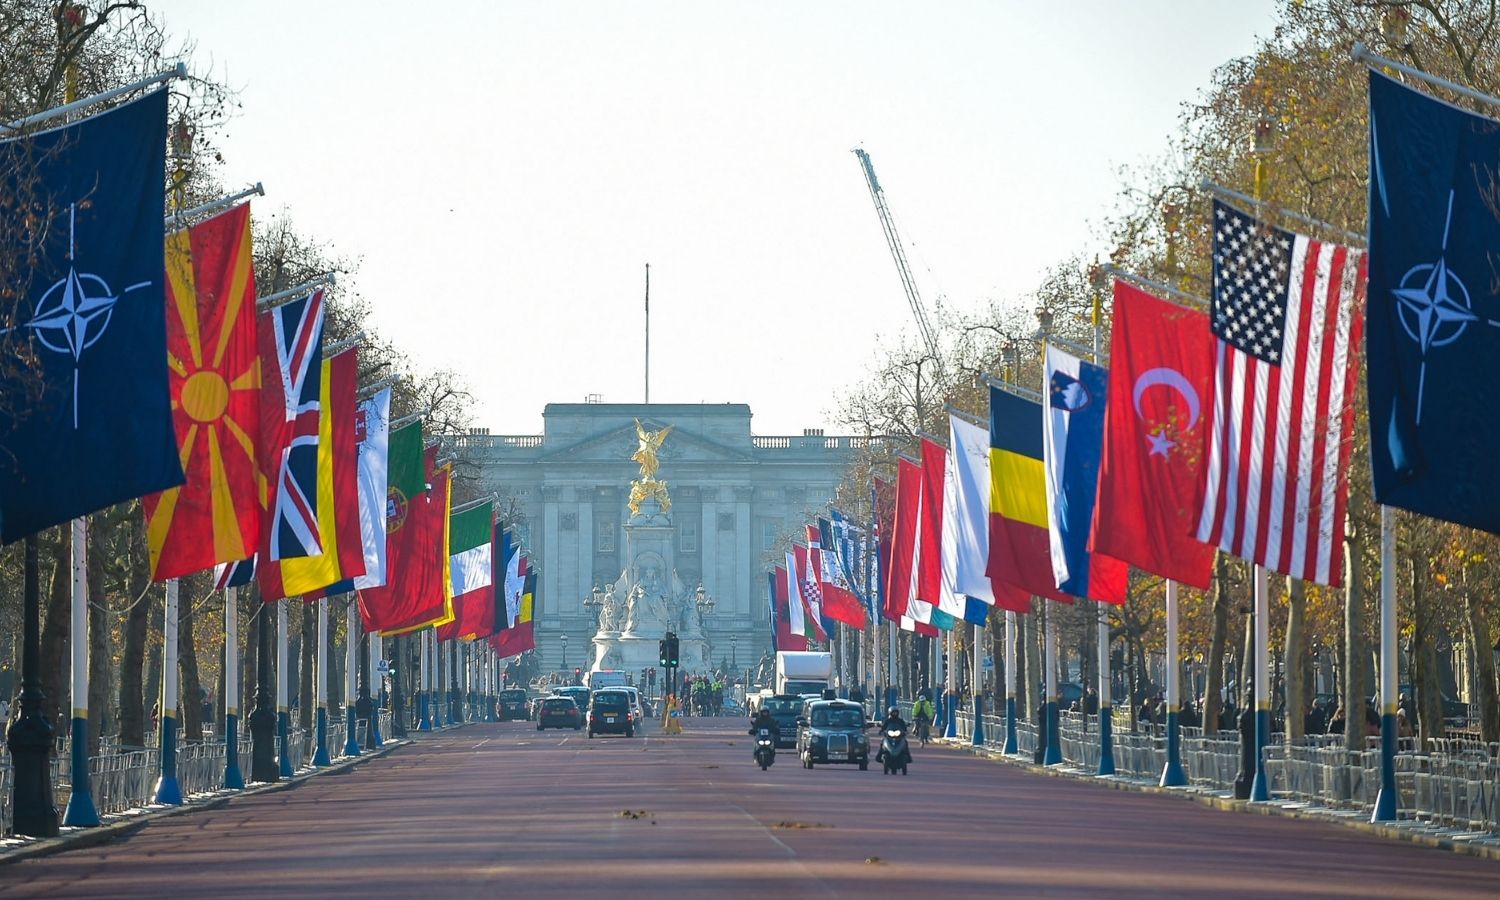 OTD in 2019: The 70th anniversary of NATO was marked by a gathering in London of world leaders